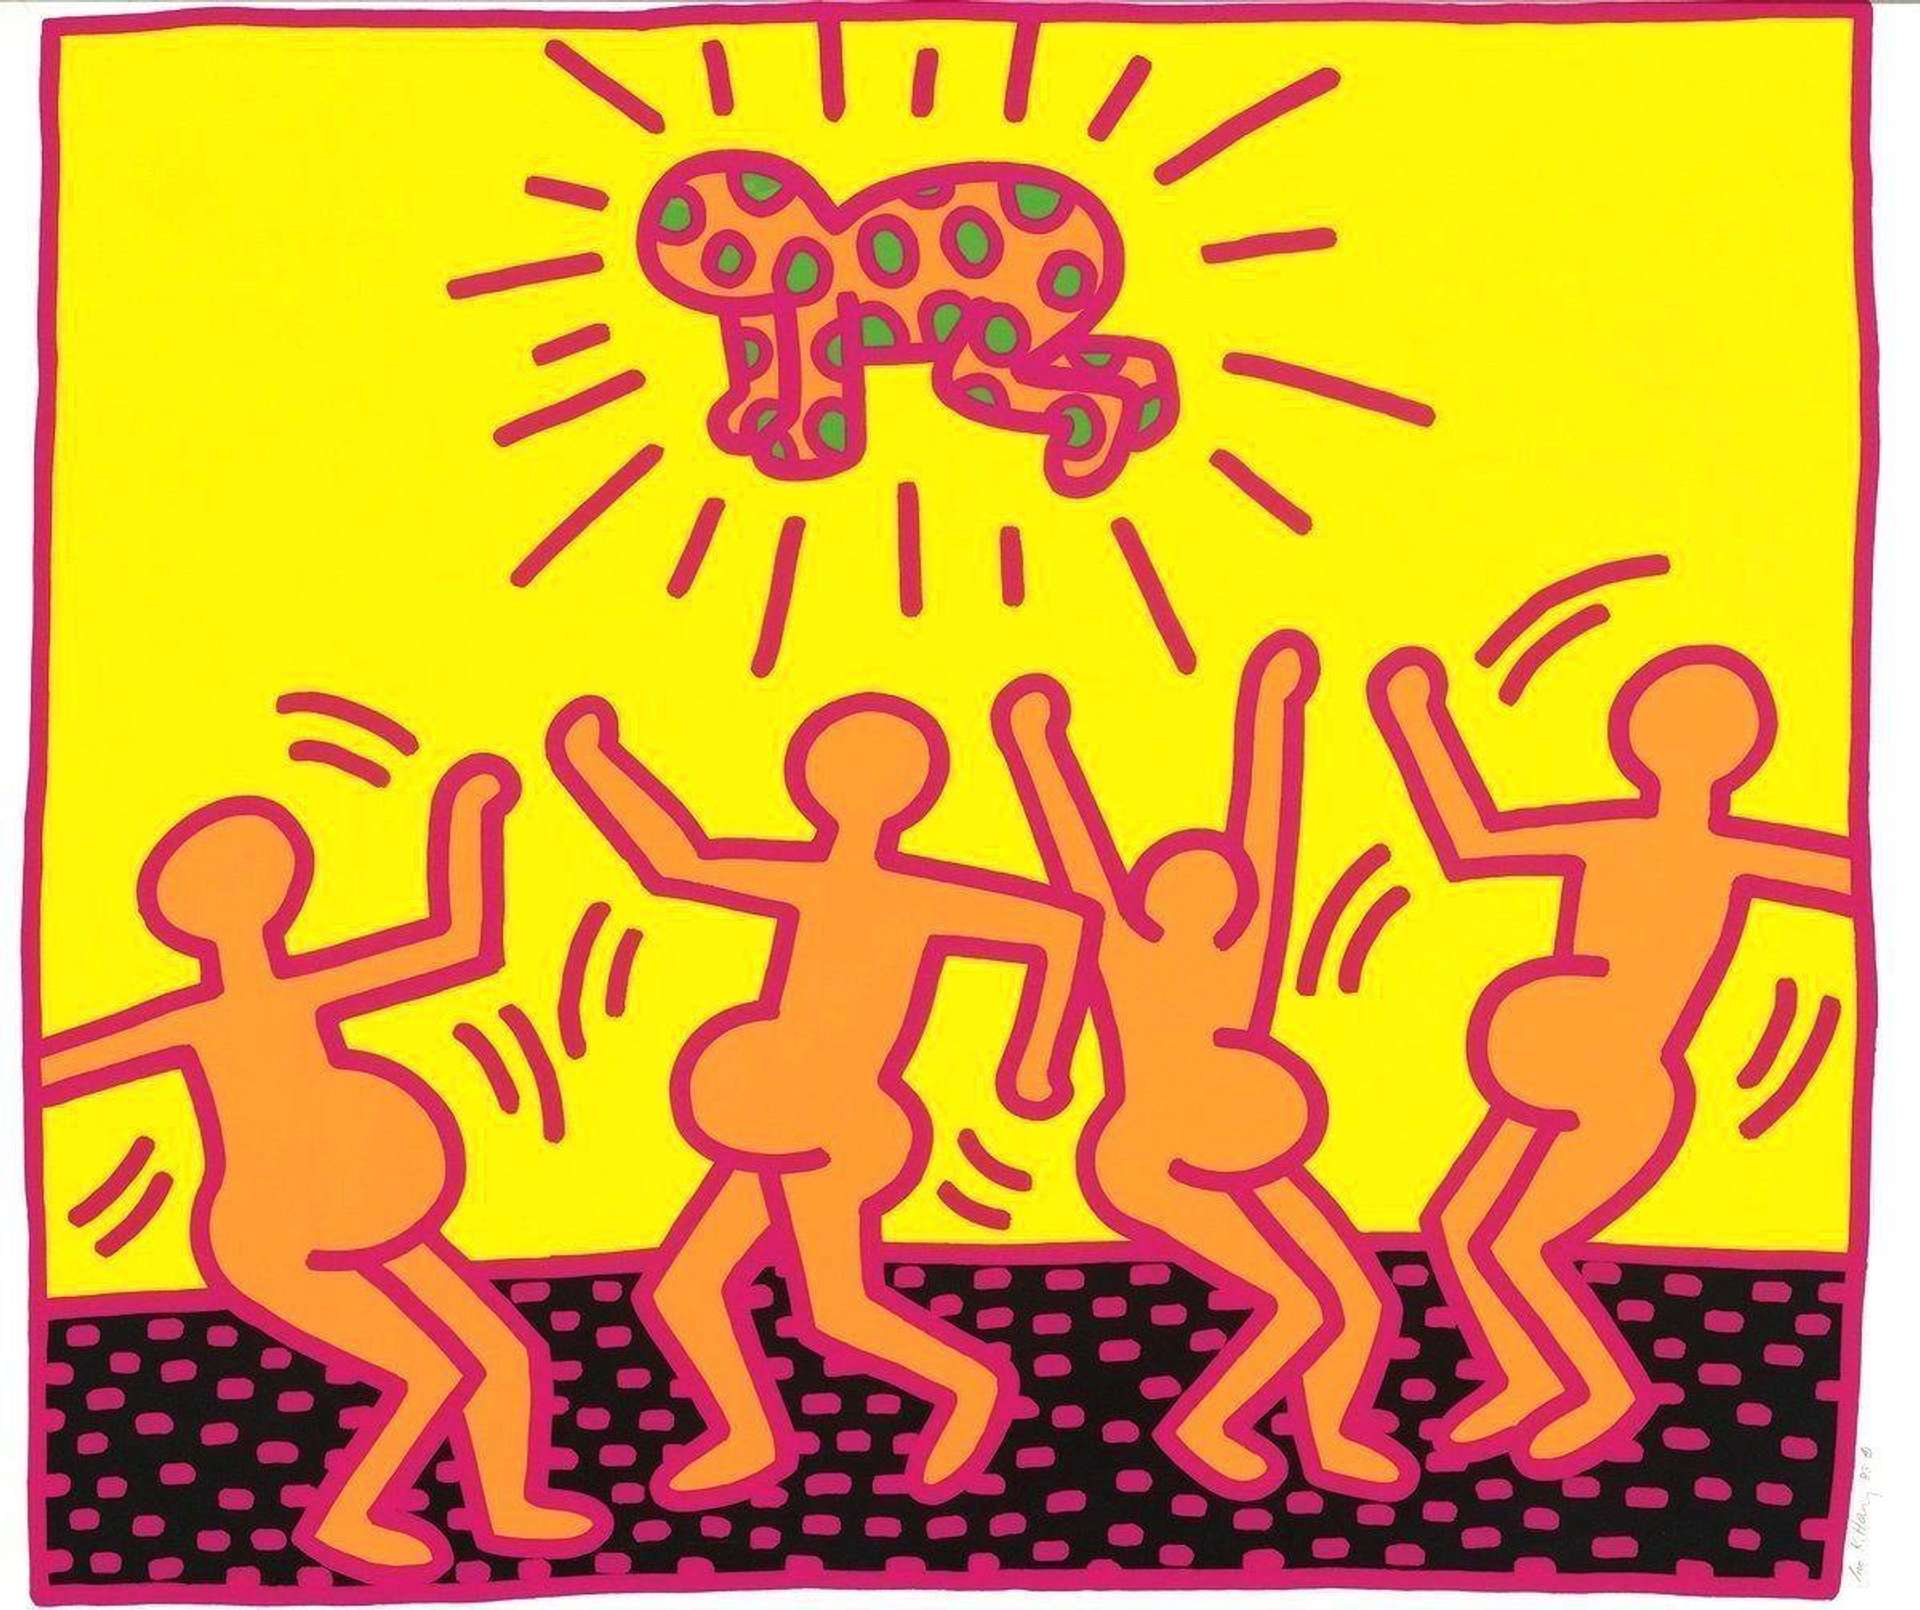 Keith Haring’s Fertility 1. A Pop Art screenprint of four orange pregnant figures dancing with one orange and green polka dot baby above them.